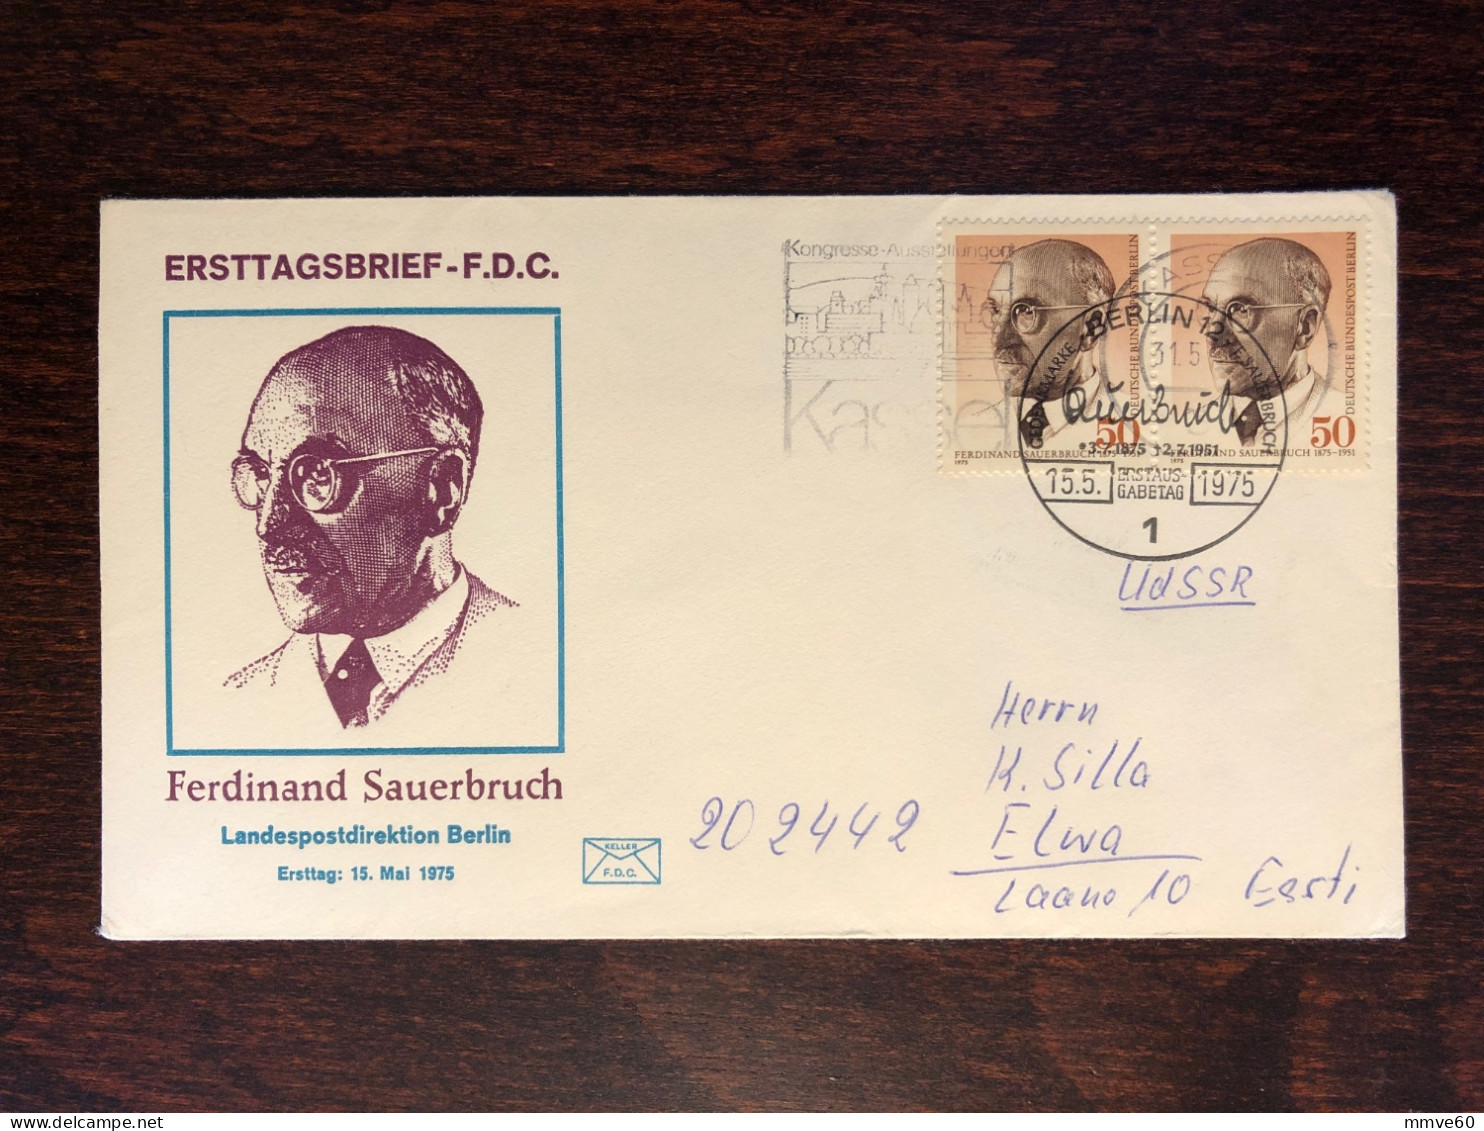 BERLIN GERMANY FDC COVER 1975 YEAR DOCTOR SAUERBRUCH SURGEON HEALTH MEDICINE STAMPS - Covers & Documents